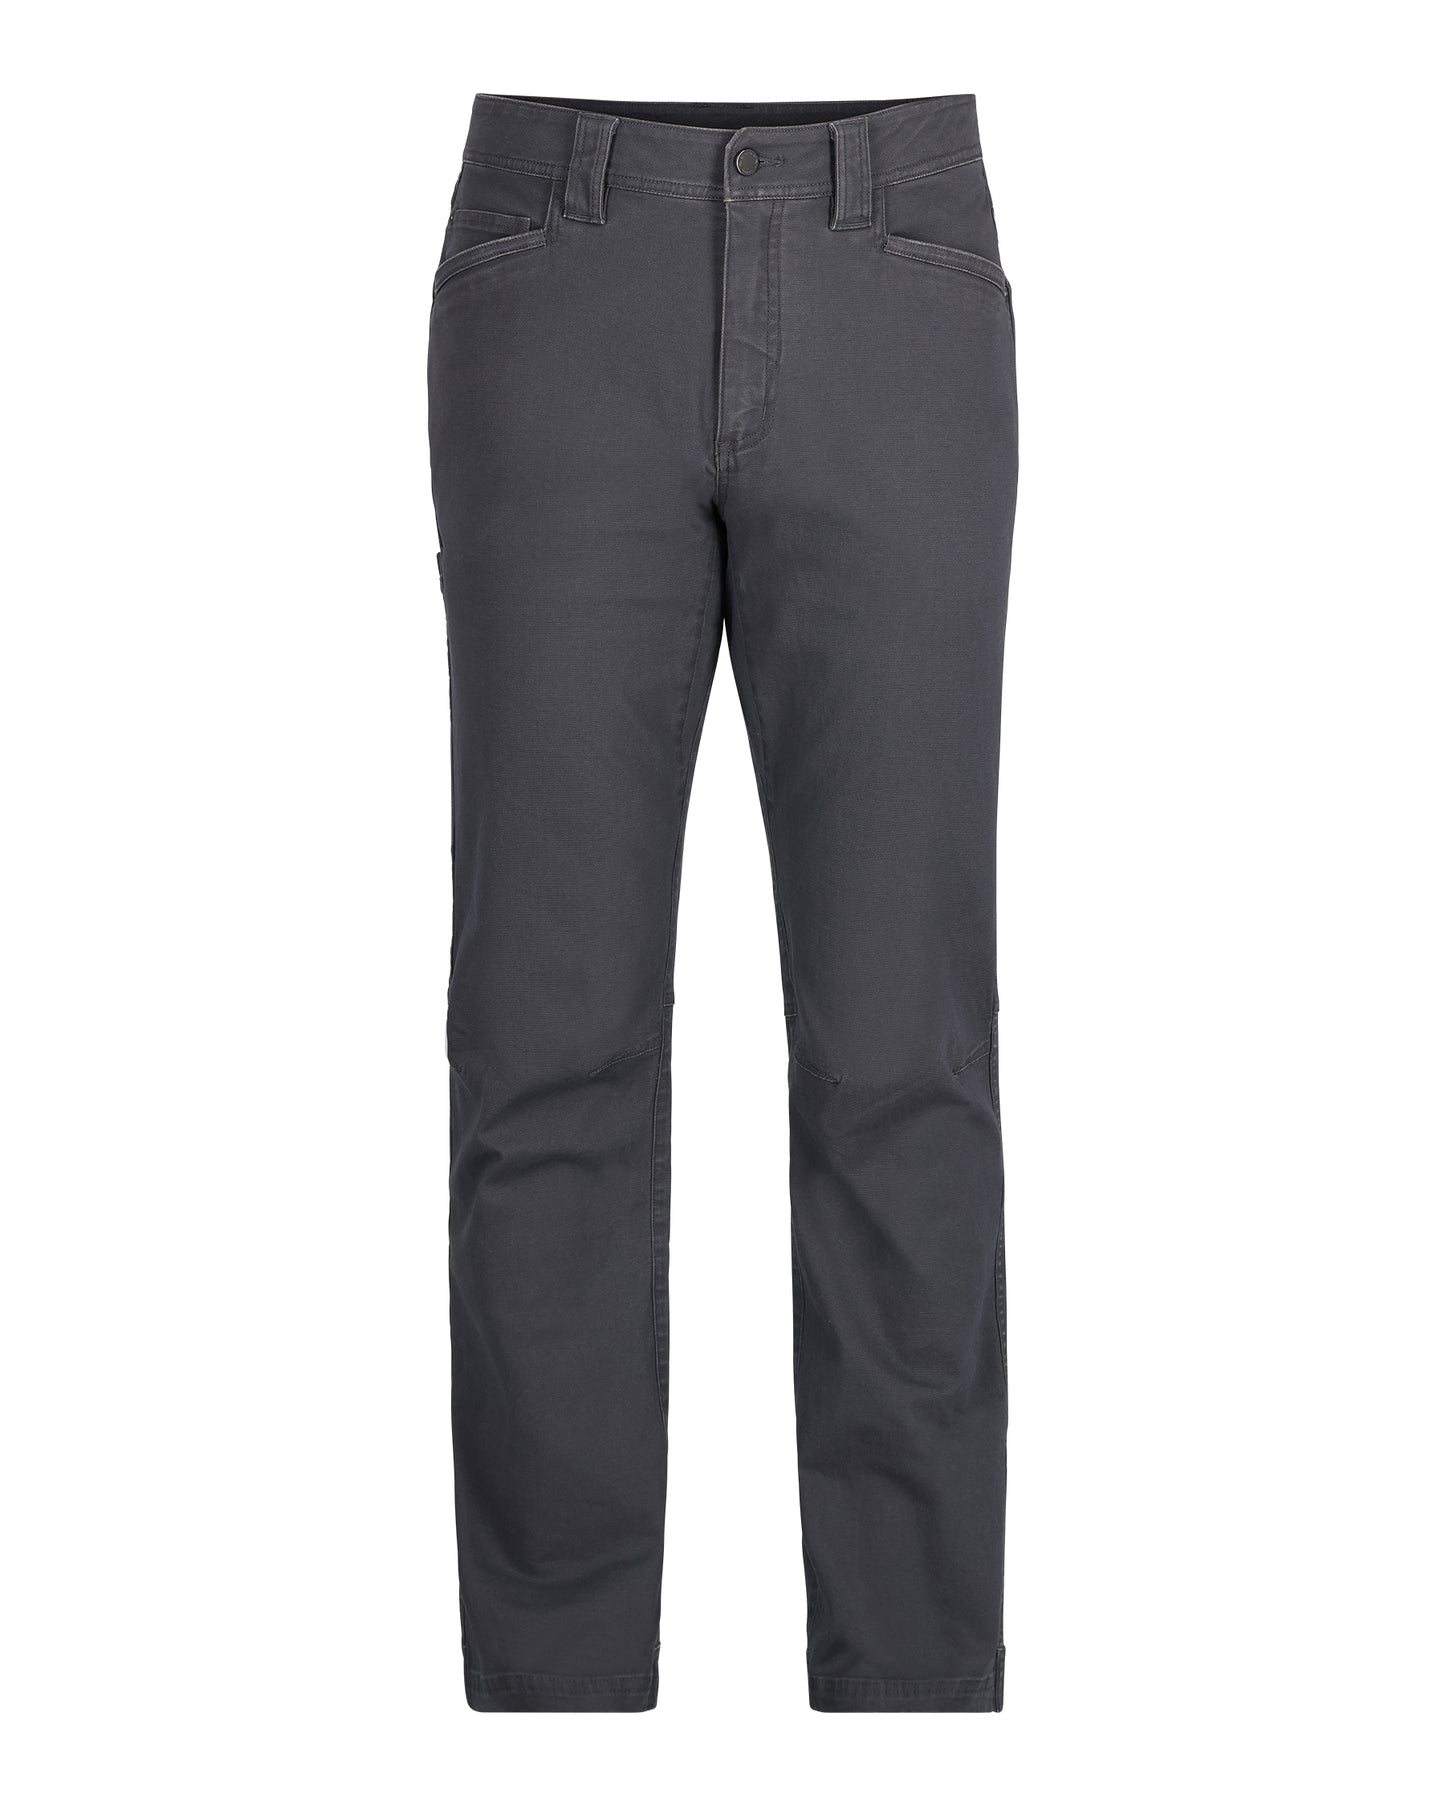    13847-096-gallatin-pant-mannequin-f23-front_